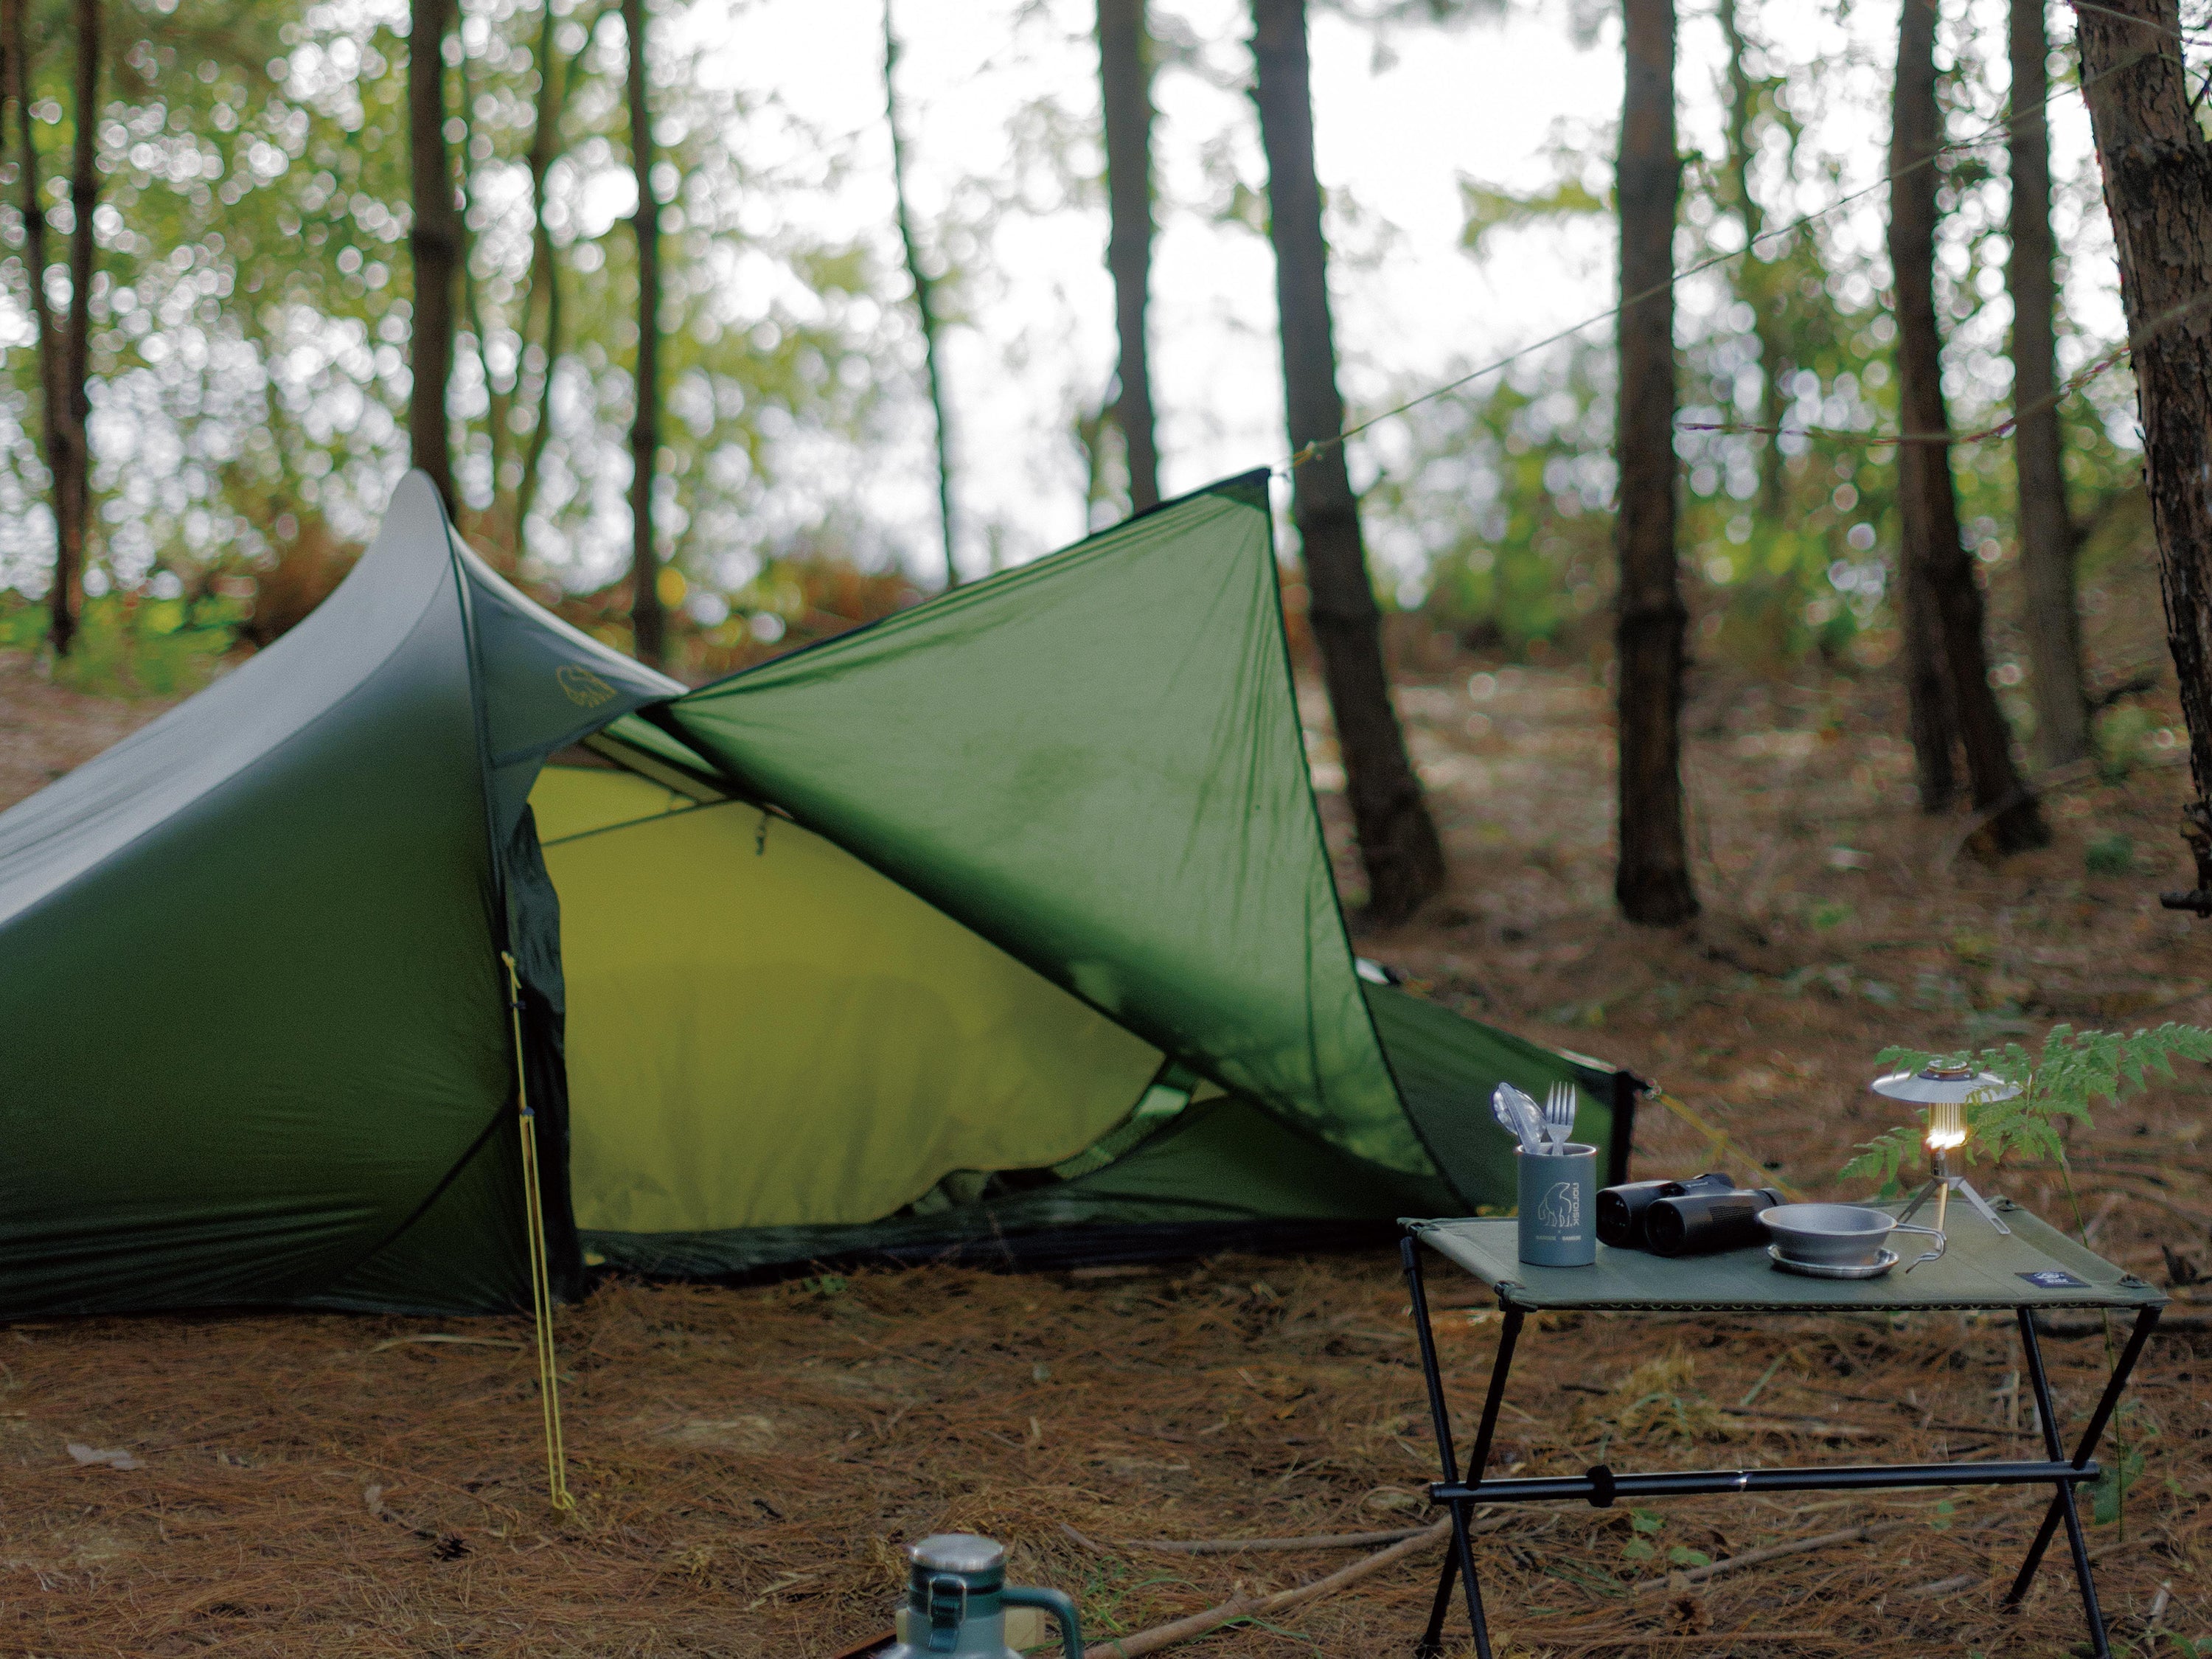 Telemark 2.2 LW tent - 2 person - Forest Green